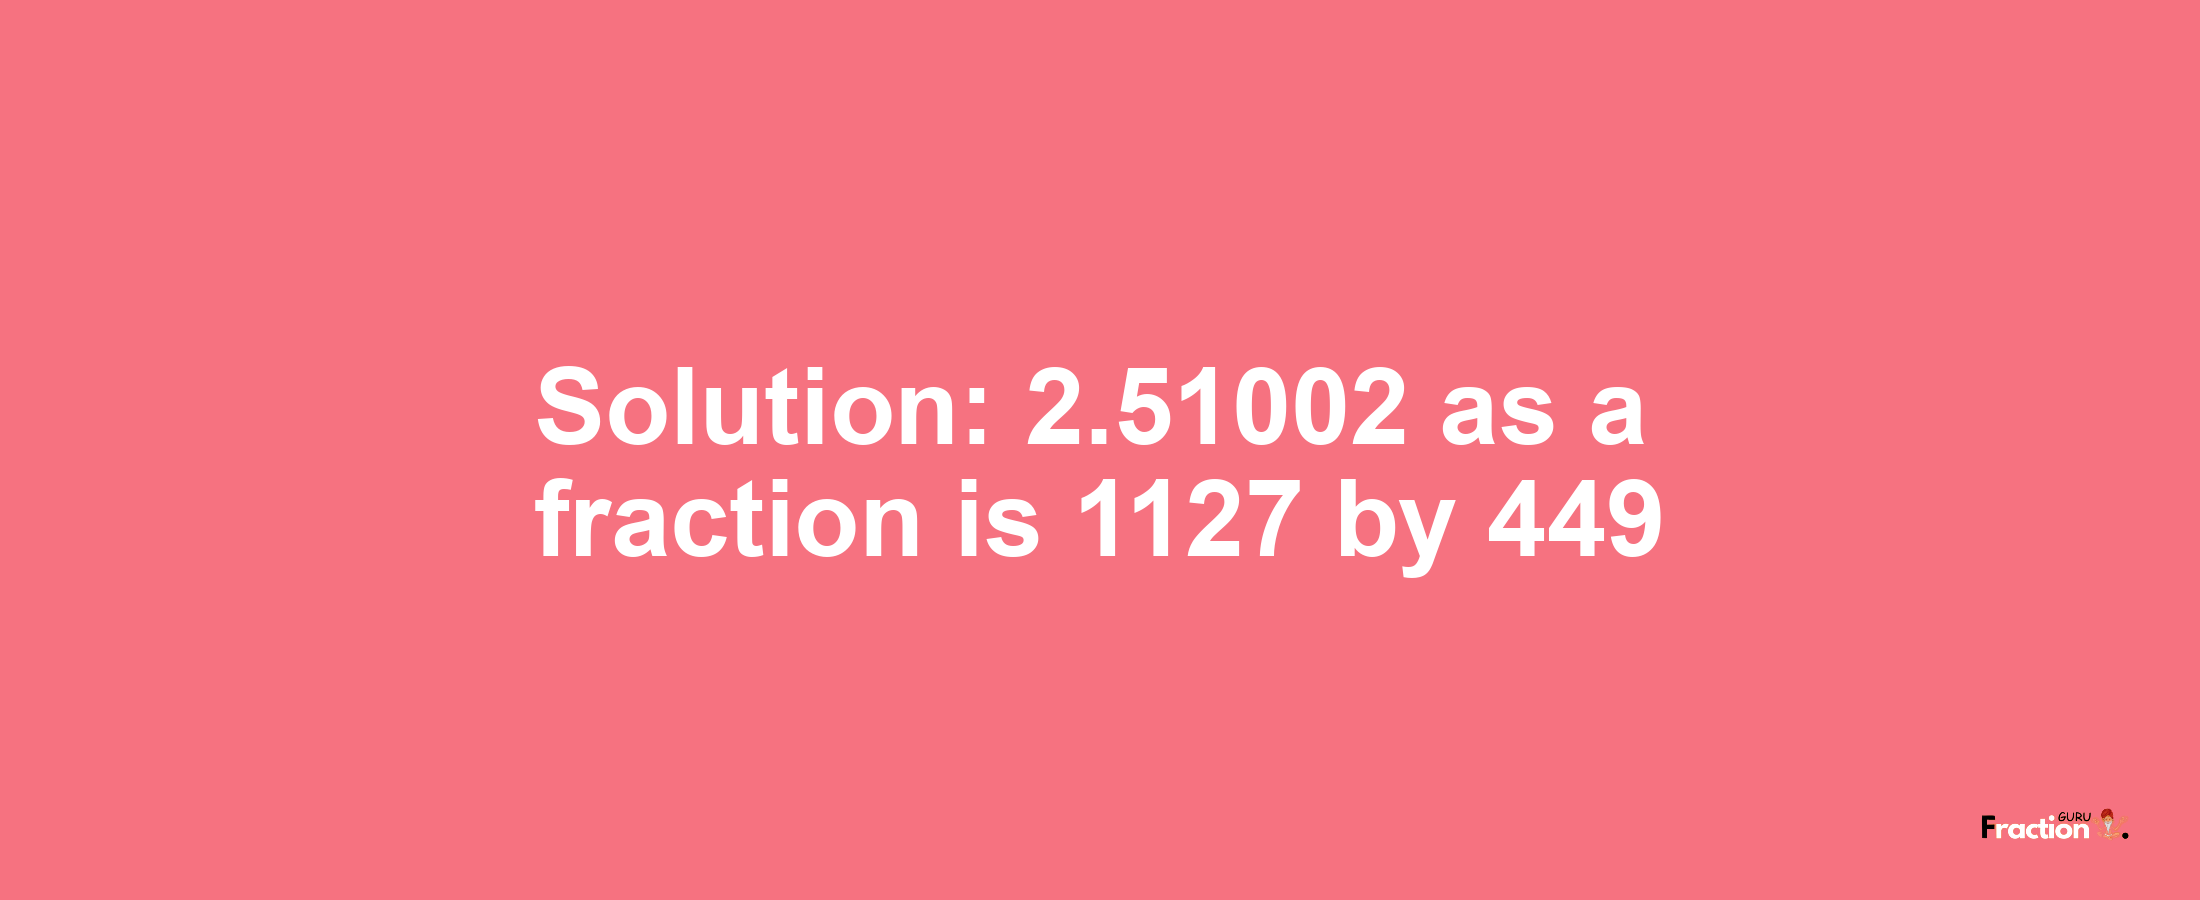 Solution:2.51002 as a fraction is 1127/449